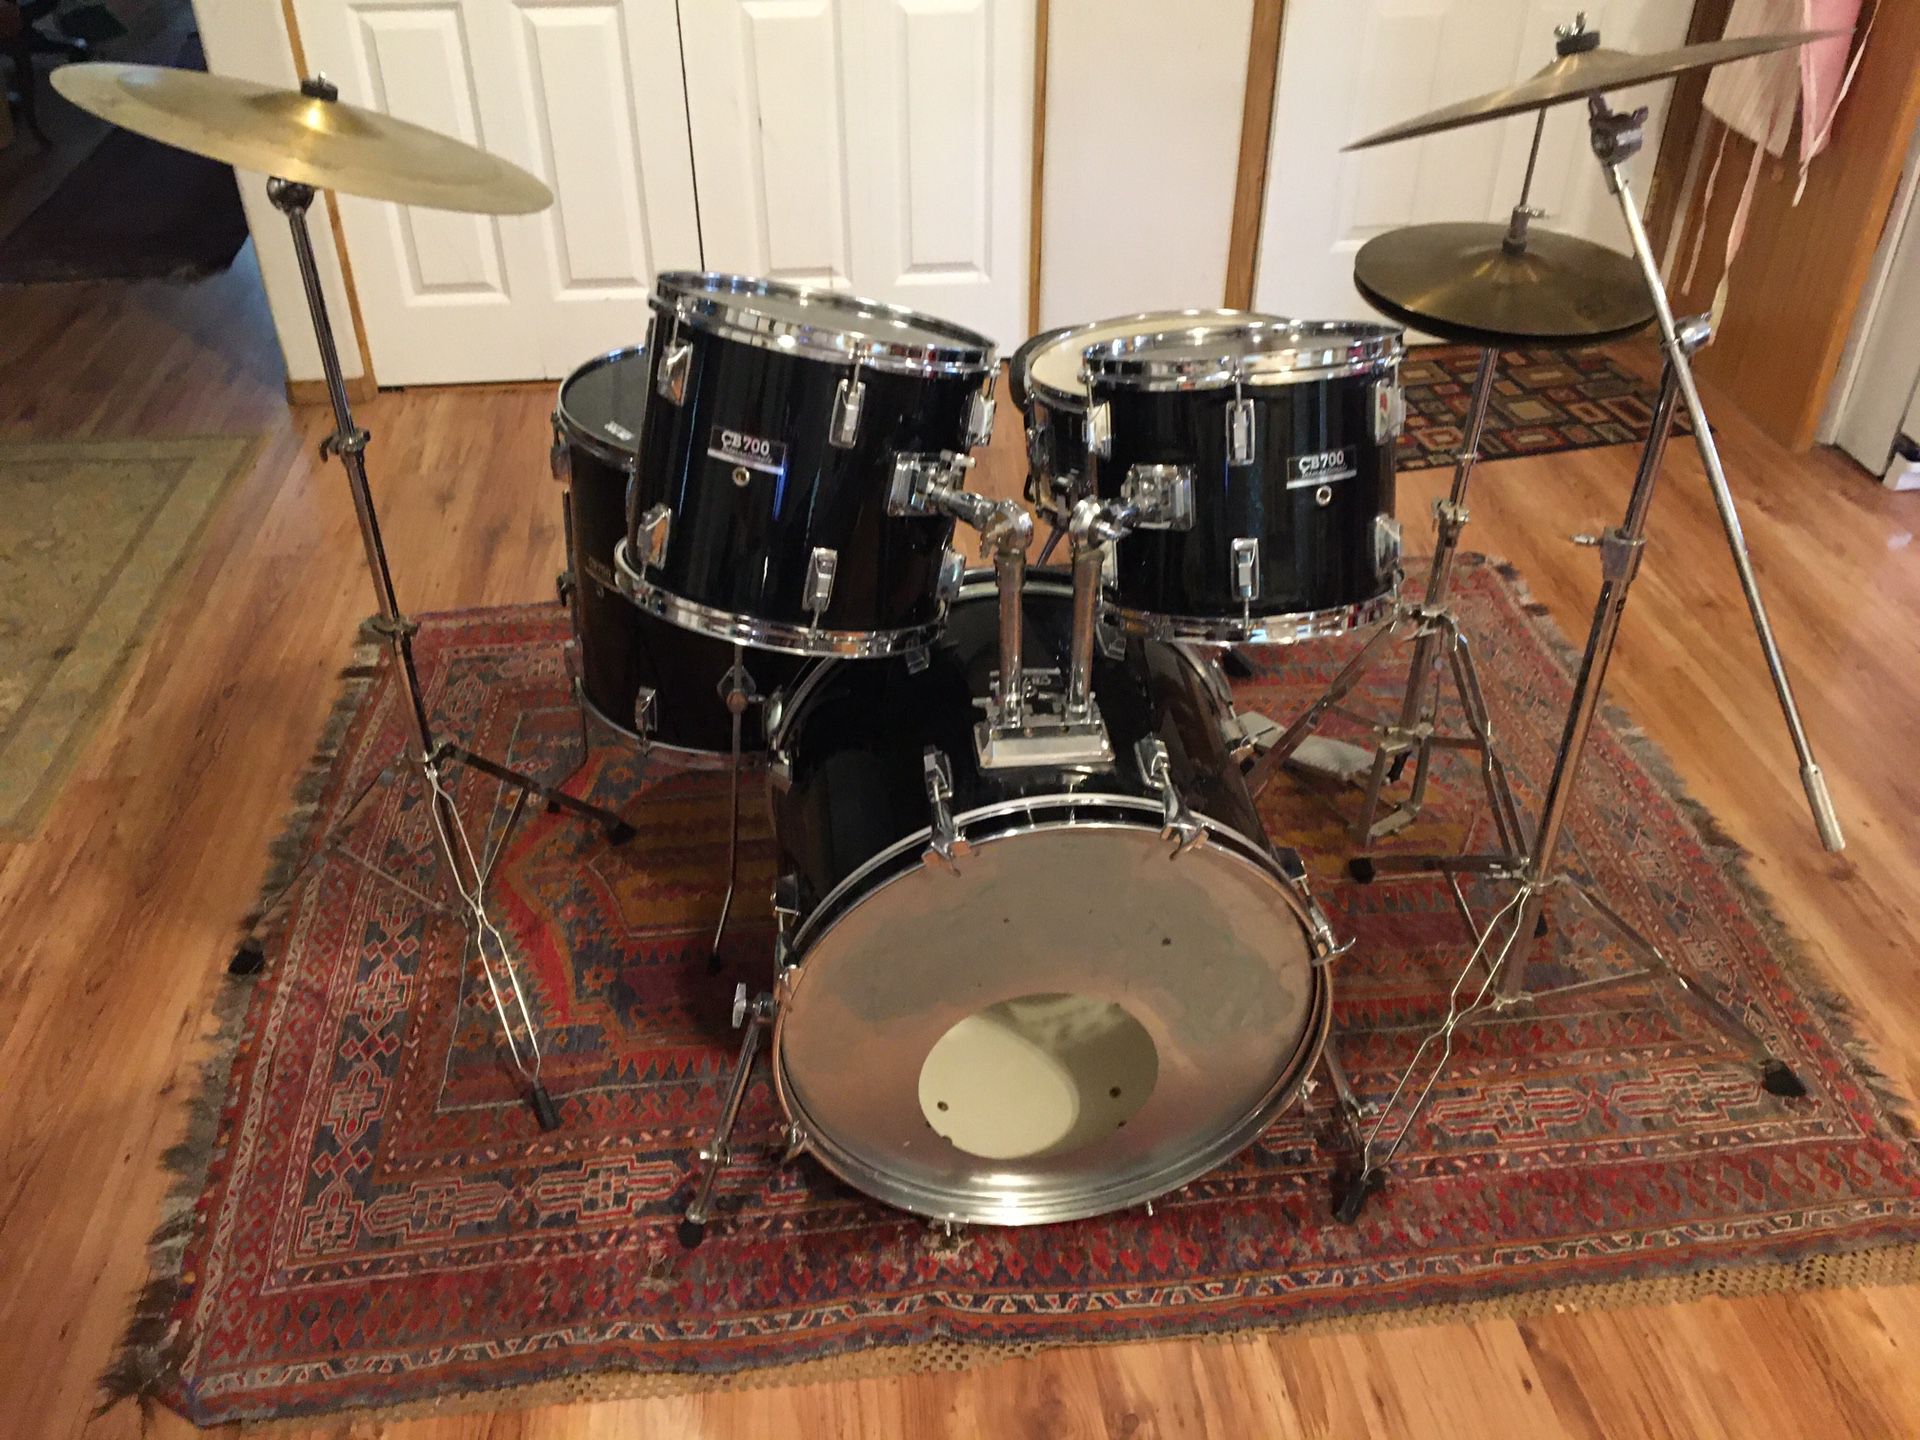 CB700 Drum Set, Cymbals and Hardware. Drums